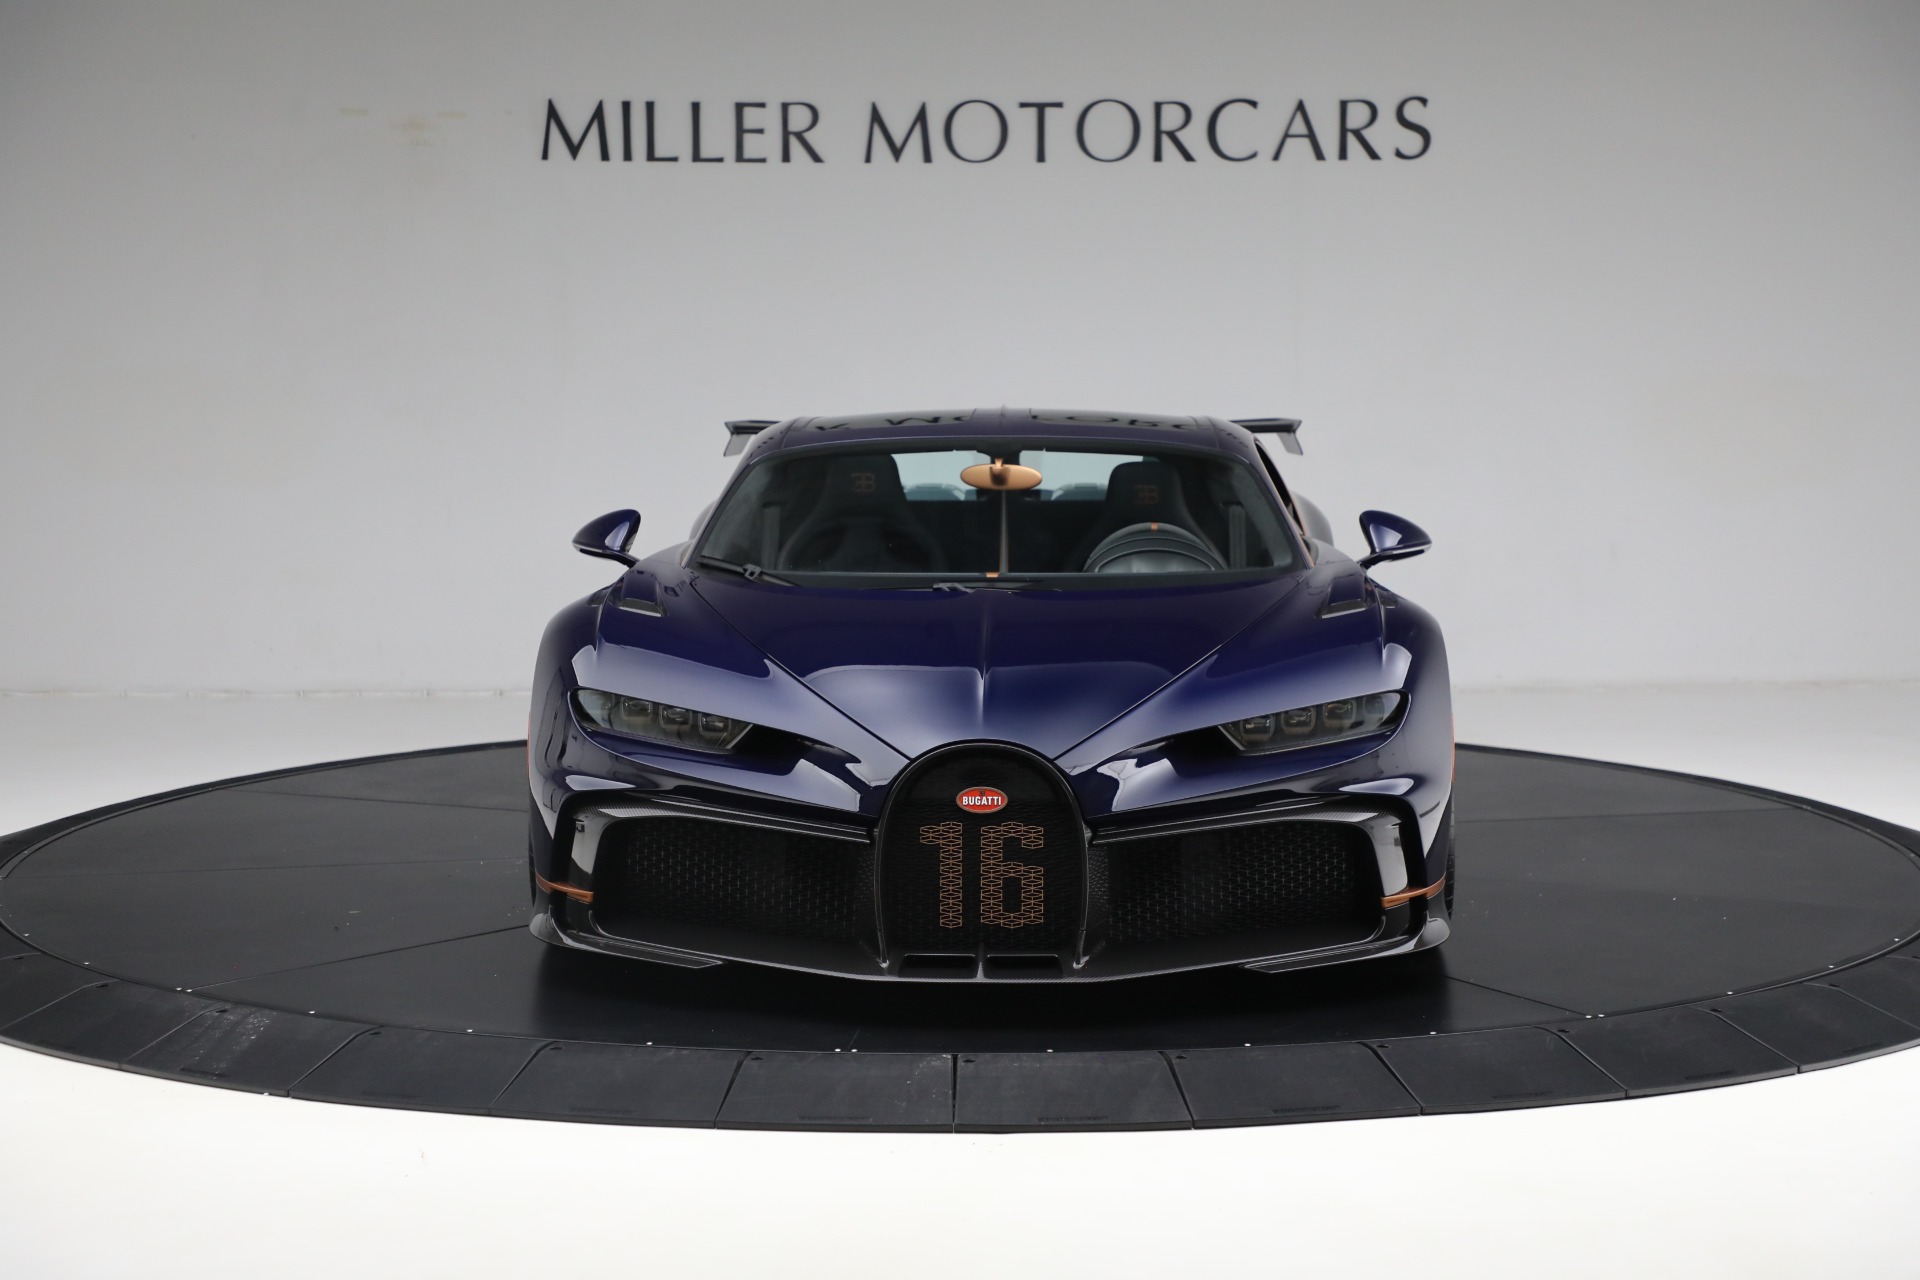 New 2021 Bugatti Chiron Pur Sport For Sale () | Miller Motorcars ...